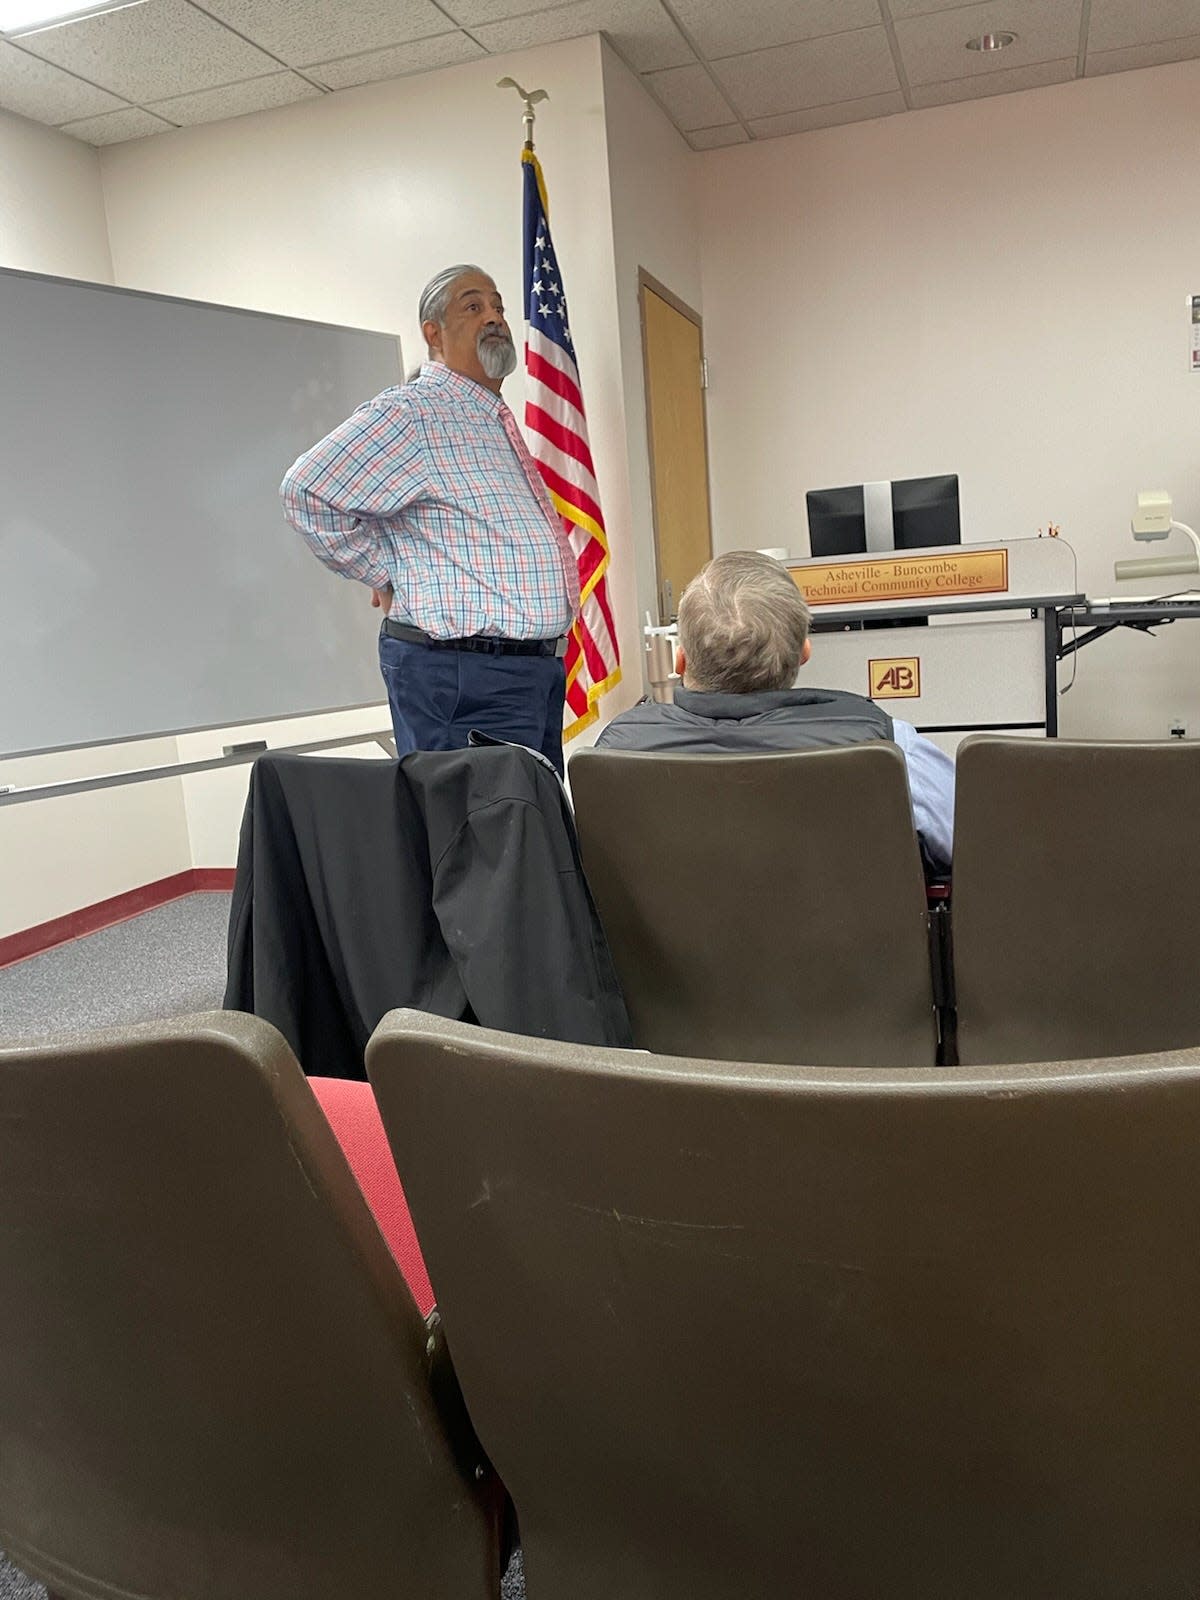 Charles George Veterans Administration Hospital Chief of Staff Dr. Ashfaq Ahsanuddin was one of the speakers at a presentation that concluded the veterans health benefit fair held in Marshall April 6.